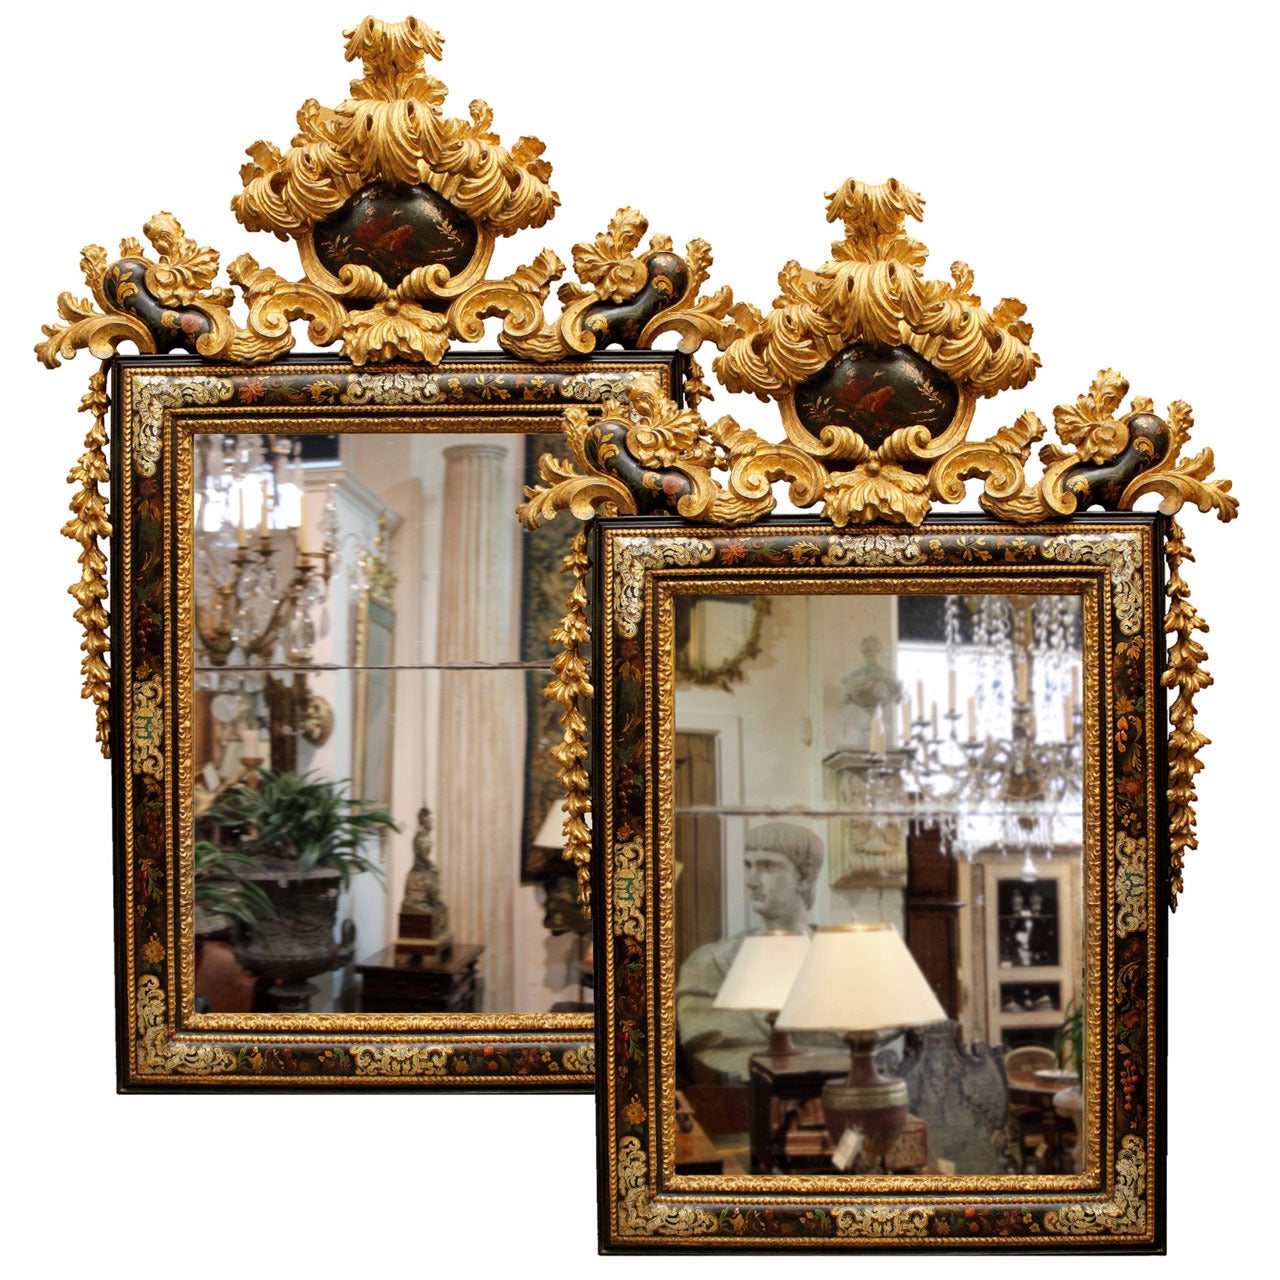 A Pair of Late 17th C. Venetian, Mother-of-Pearl-Inlaid and Giltwood Mirrors